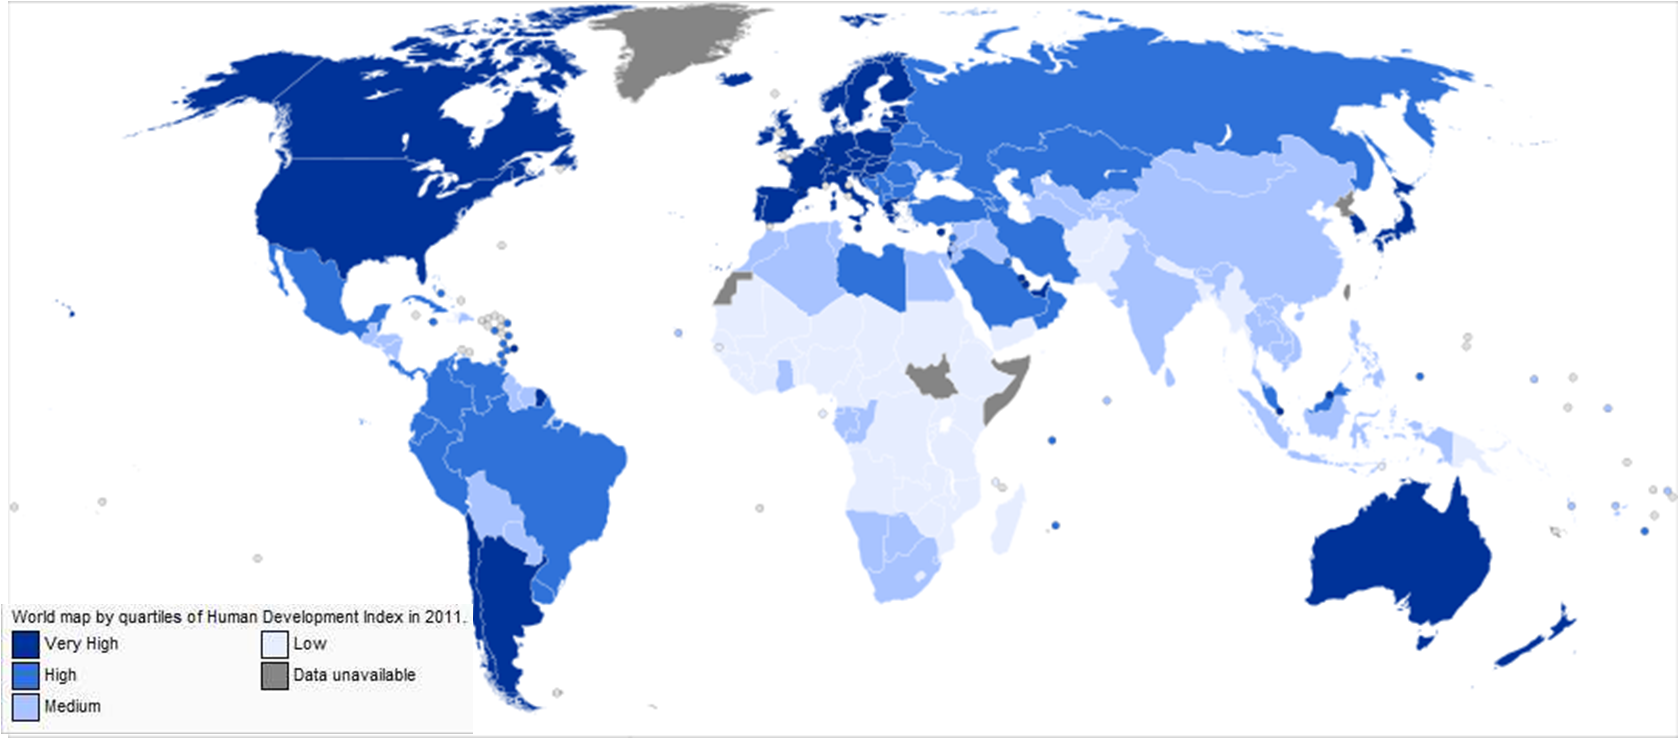 World map by quartiles of Human Development Index in 2011.